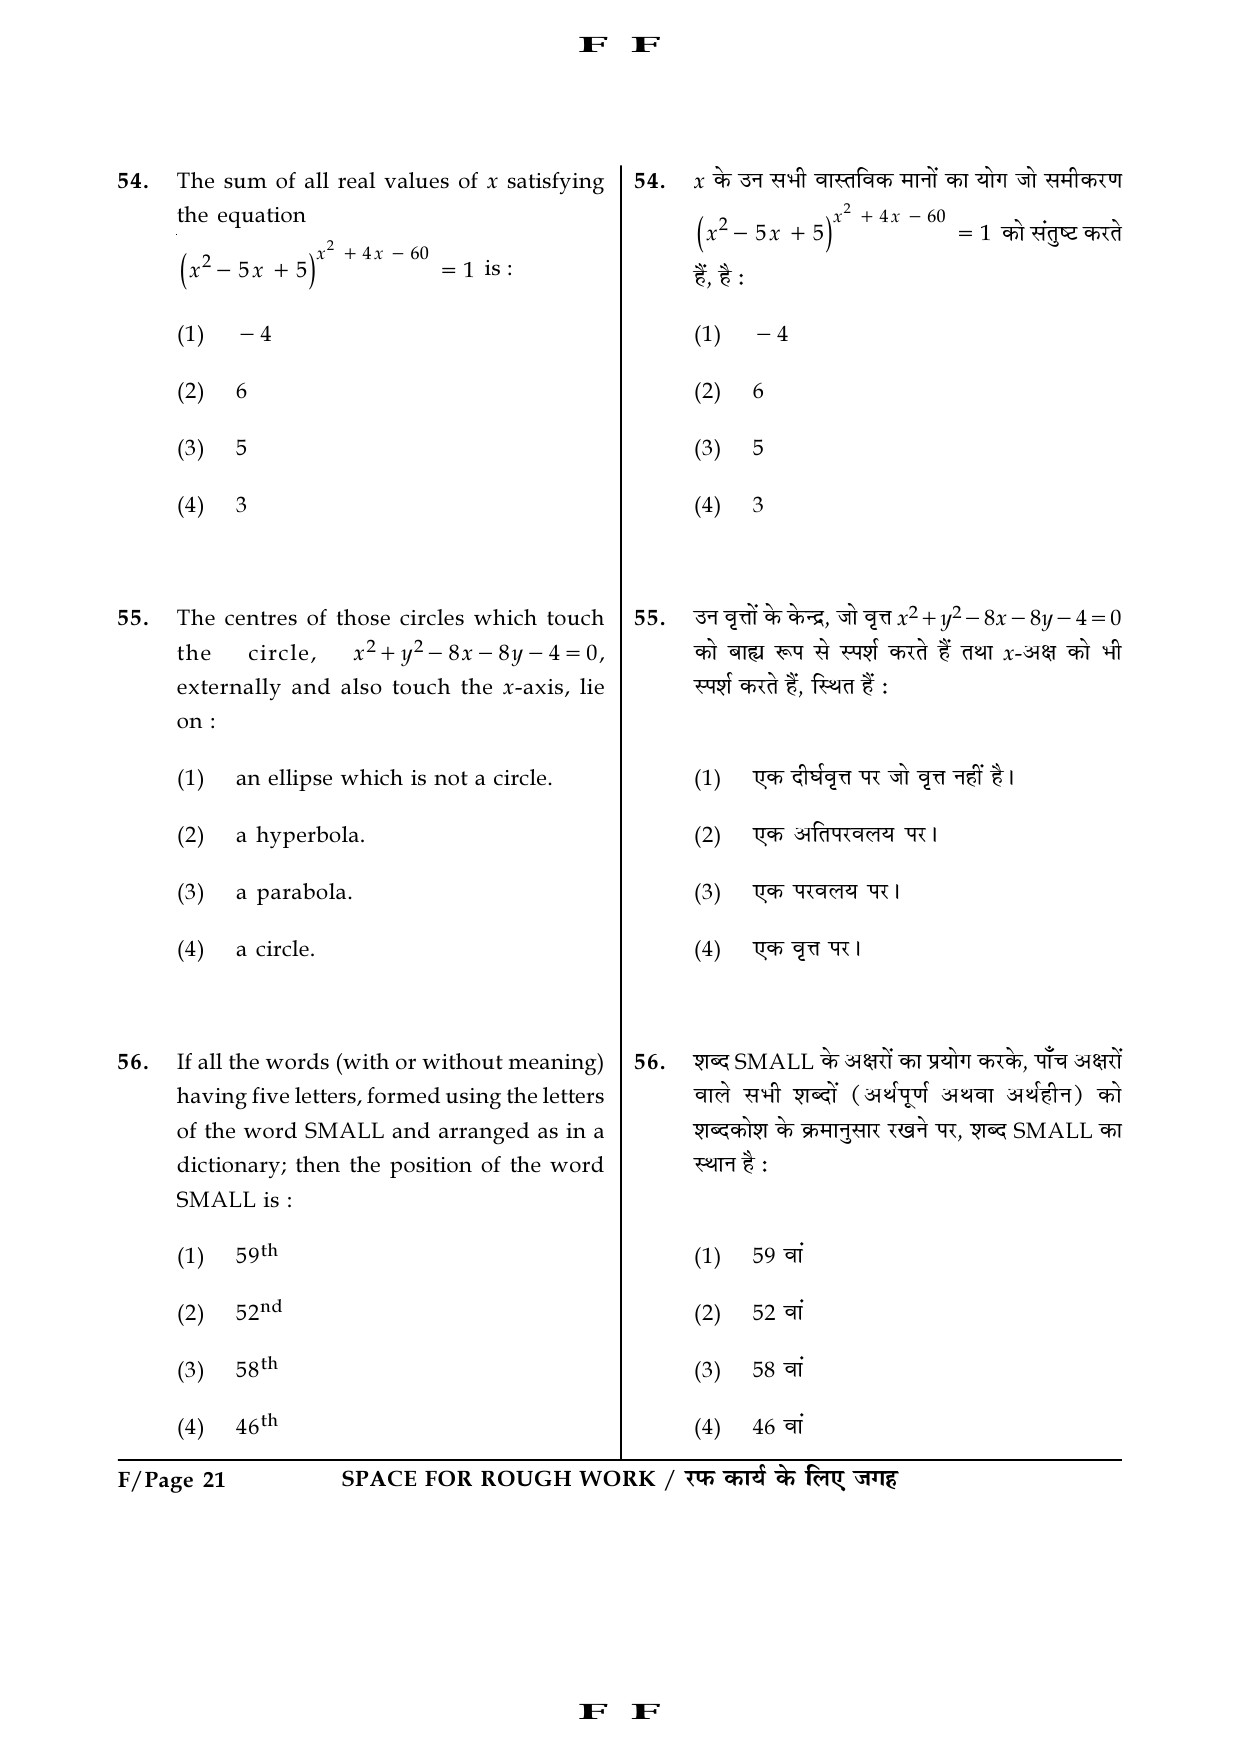 JEE Main Exam Question Paper 2016 Booklet F 21